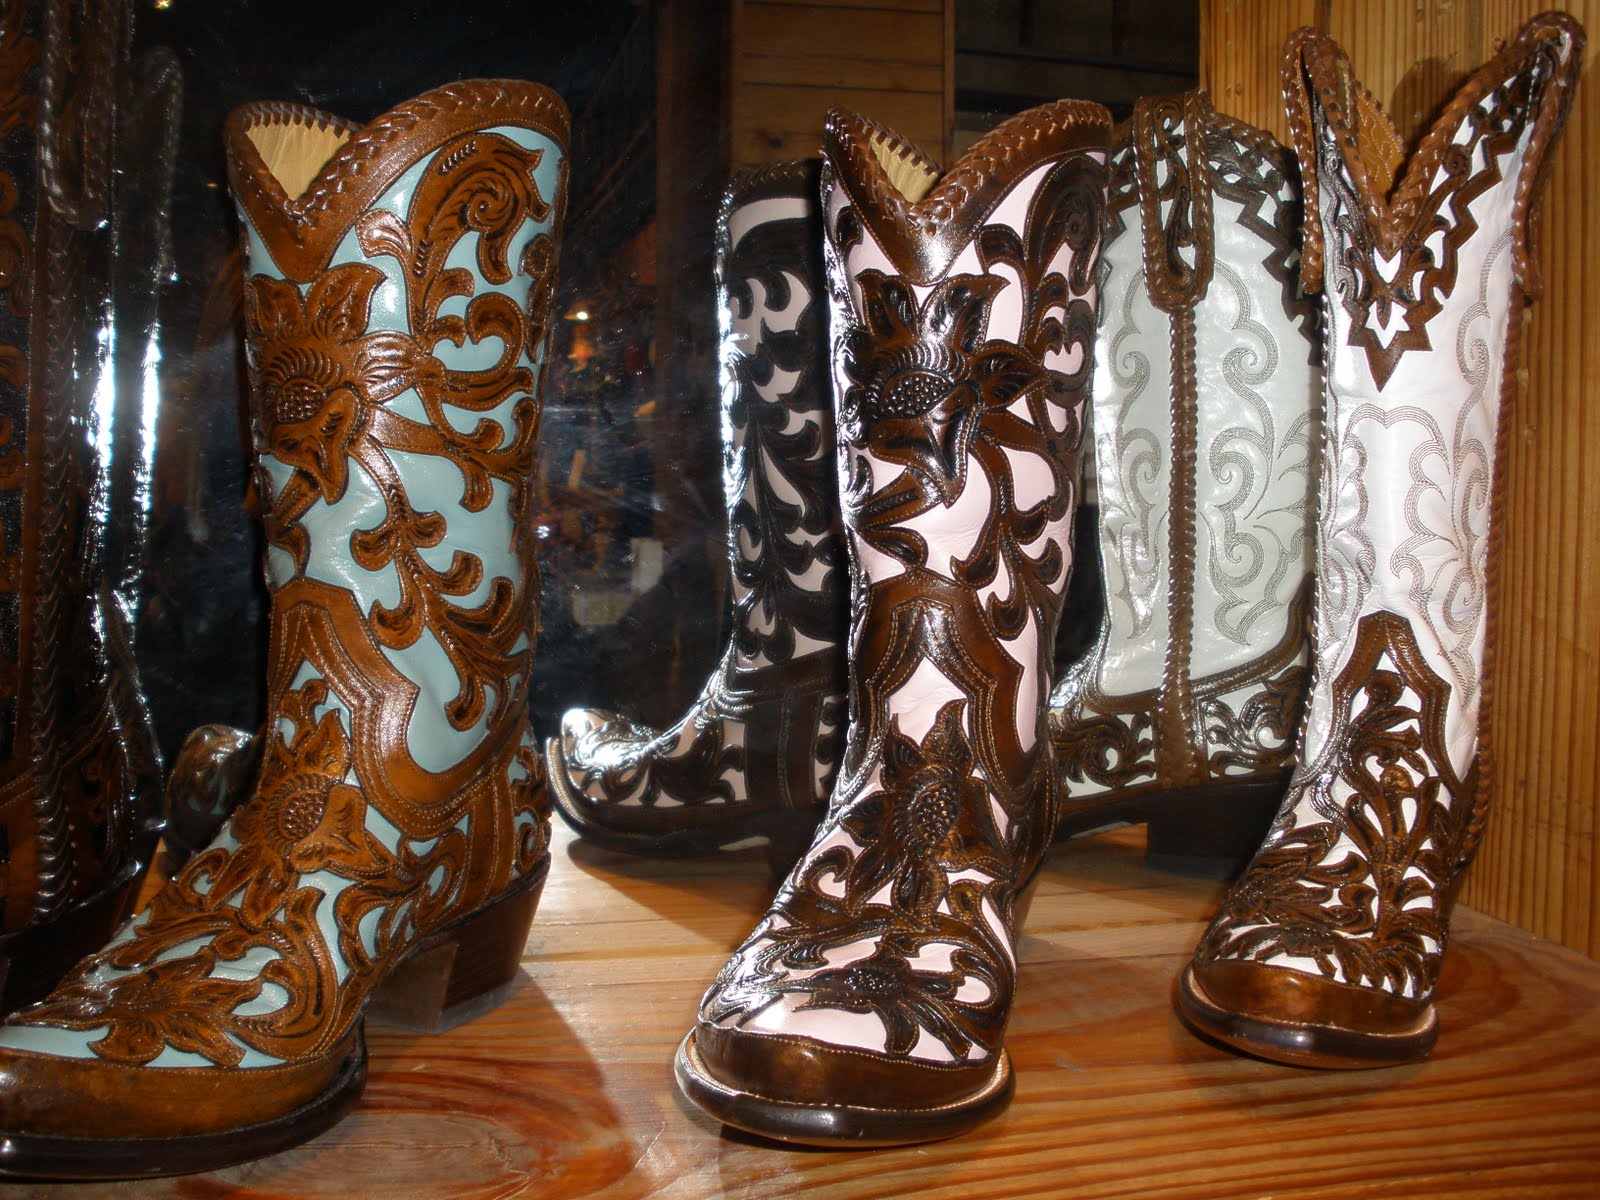 Crystal Cattle: Getting closer to cowboy boot Heaven